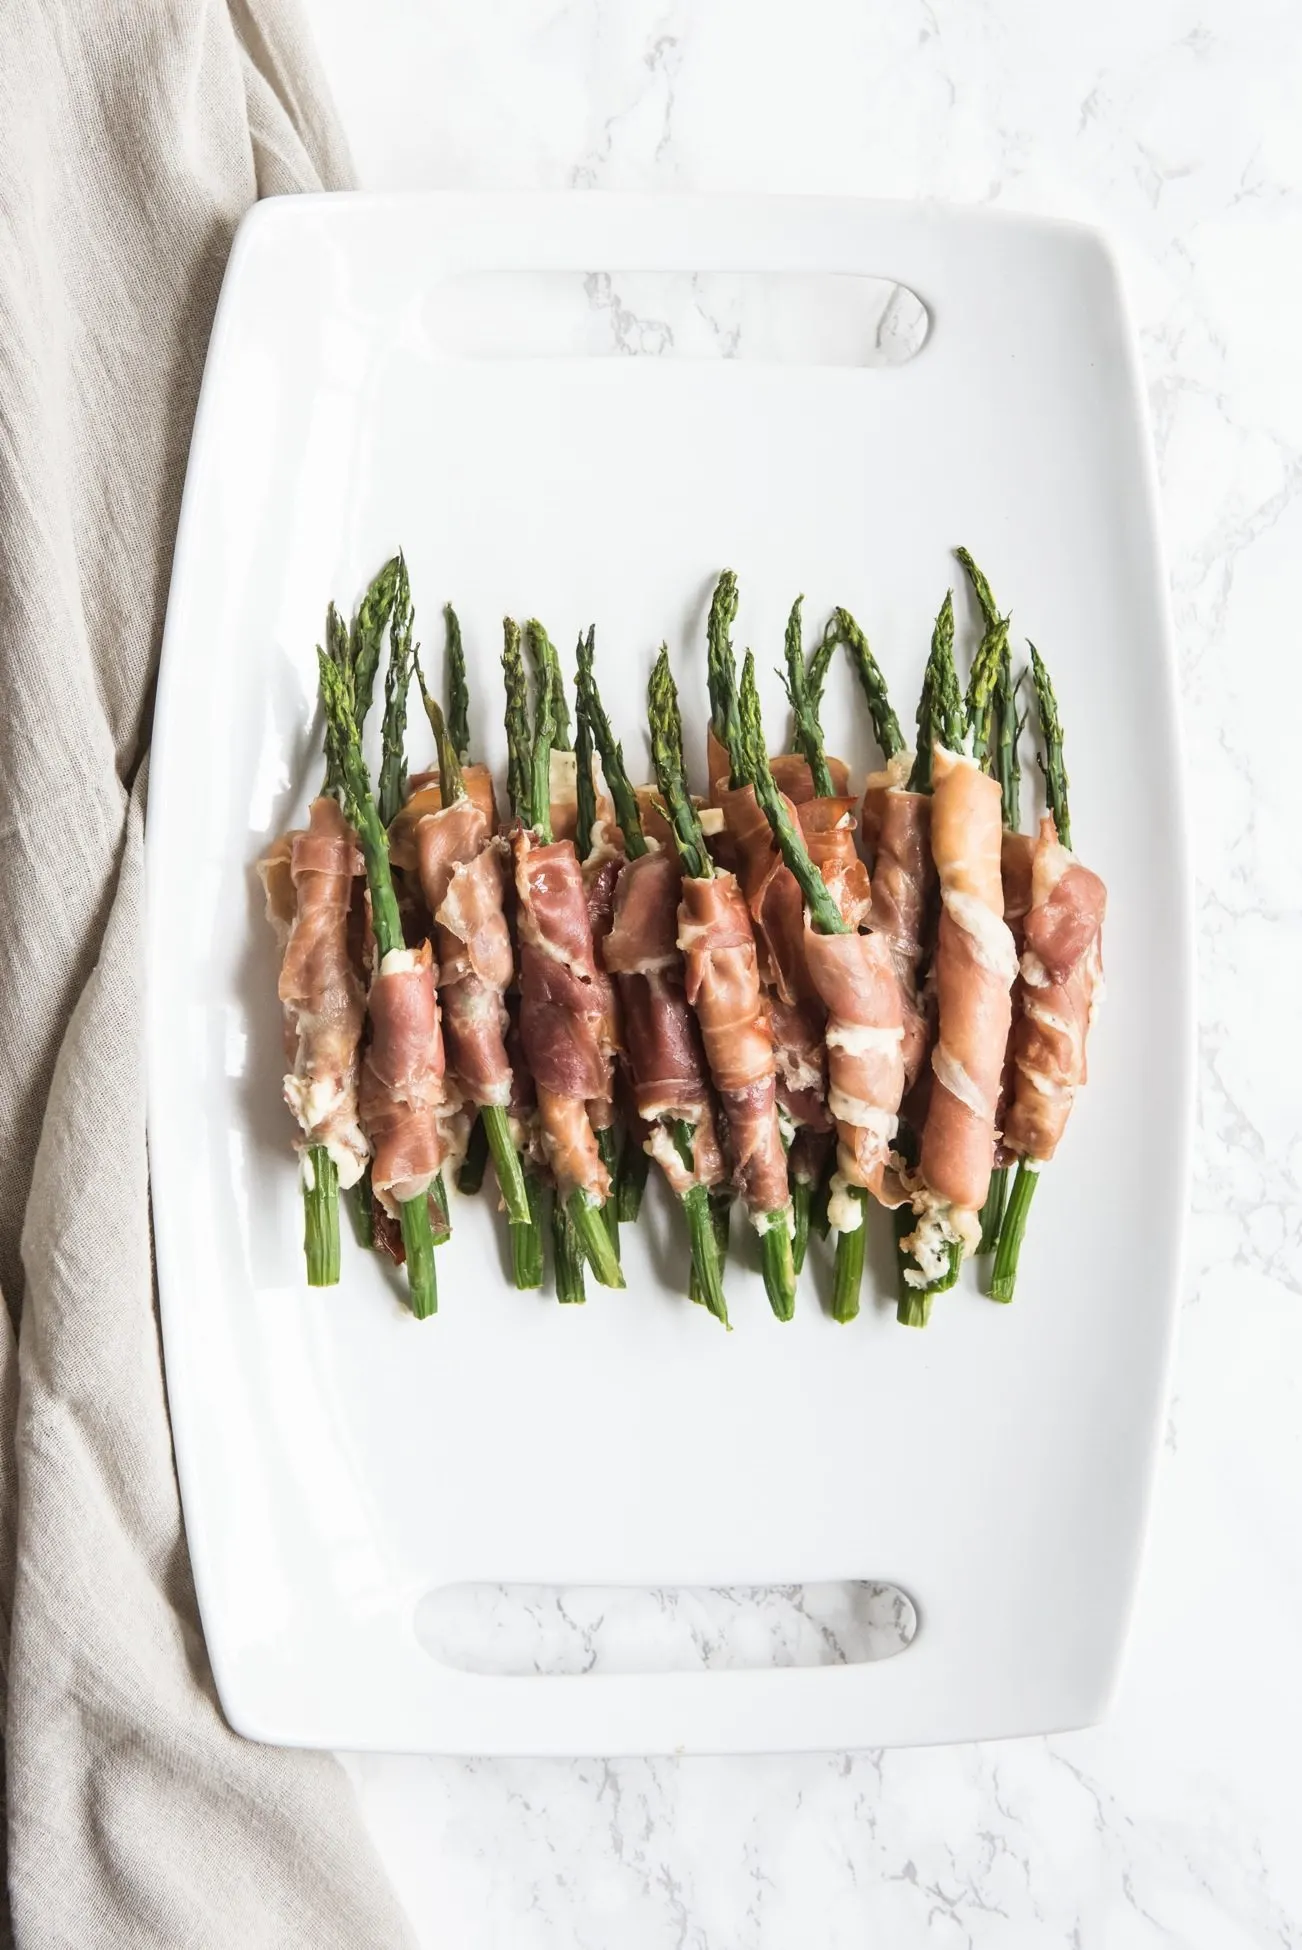 Prosciutto Wrapped Asparagus Recipe | Easy party appetizers, cocktail recipes, entertaining tips, party ideas and more from @cydconverse